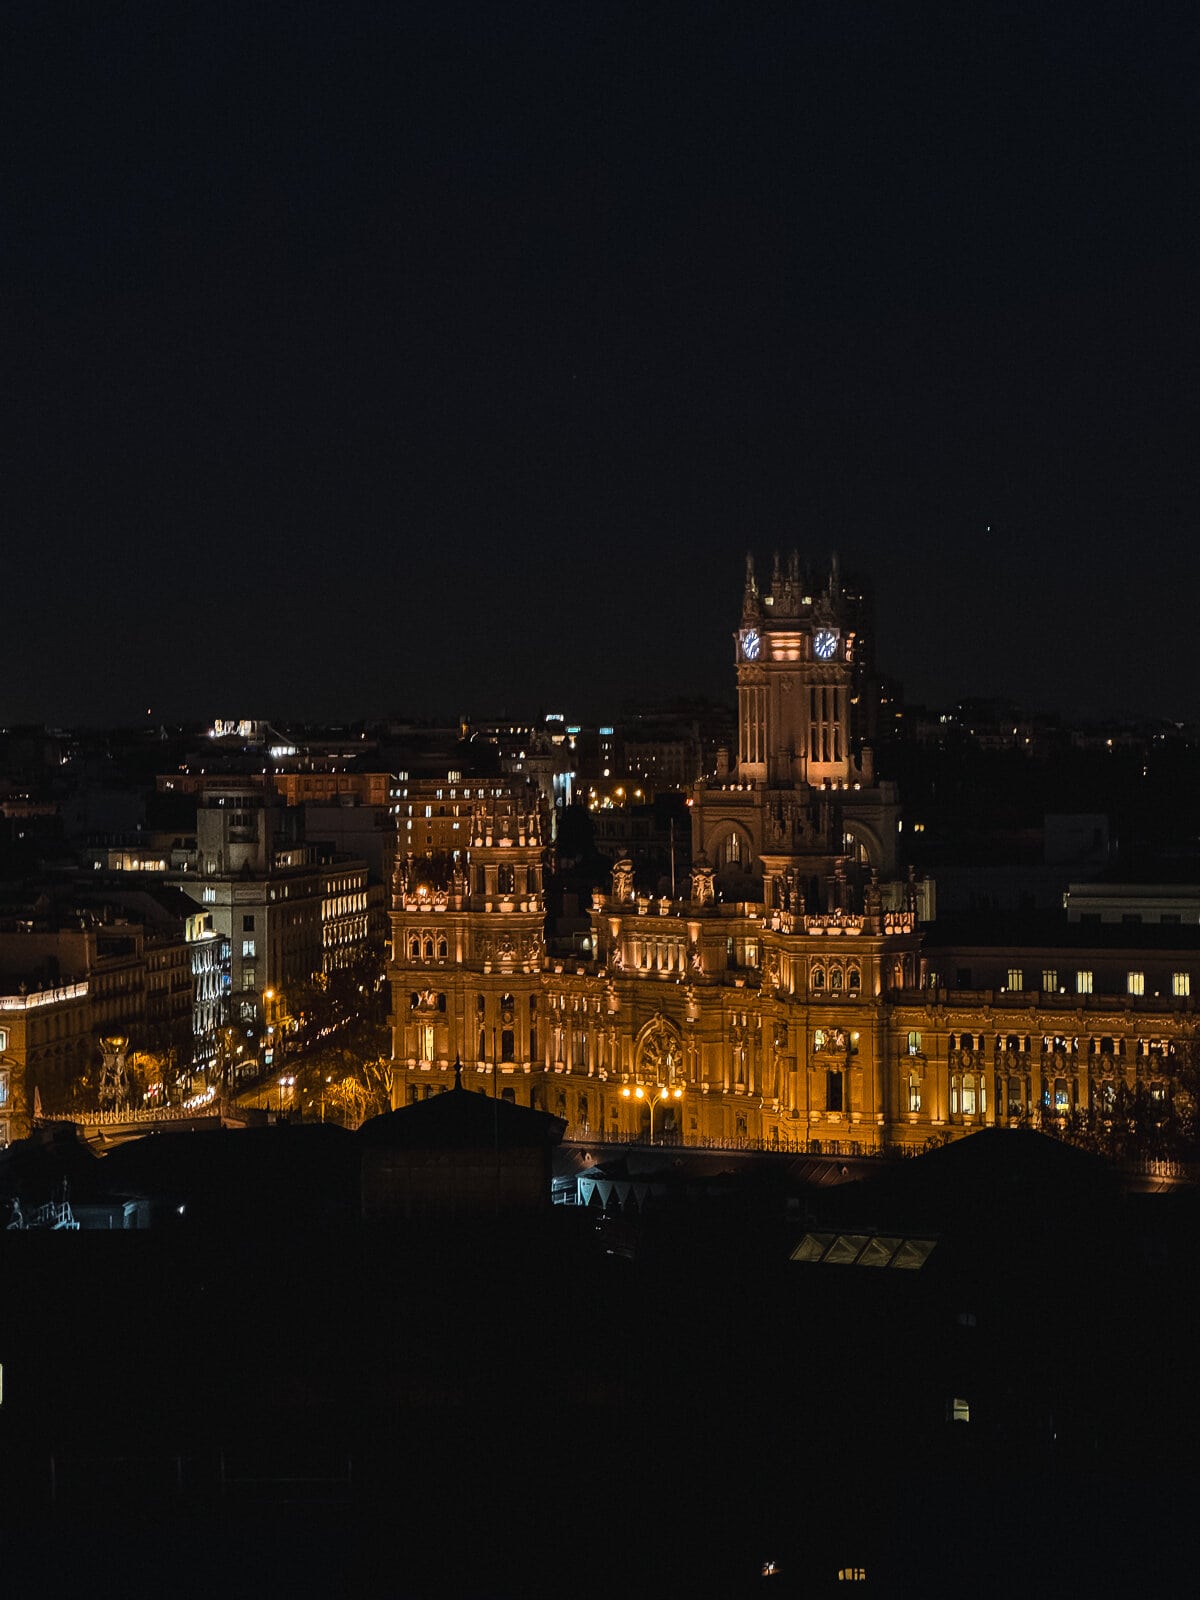 The city's architecture glows with life under the night sky, highlighted by the illuminated façade of a grand, historic building that dominates the view.